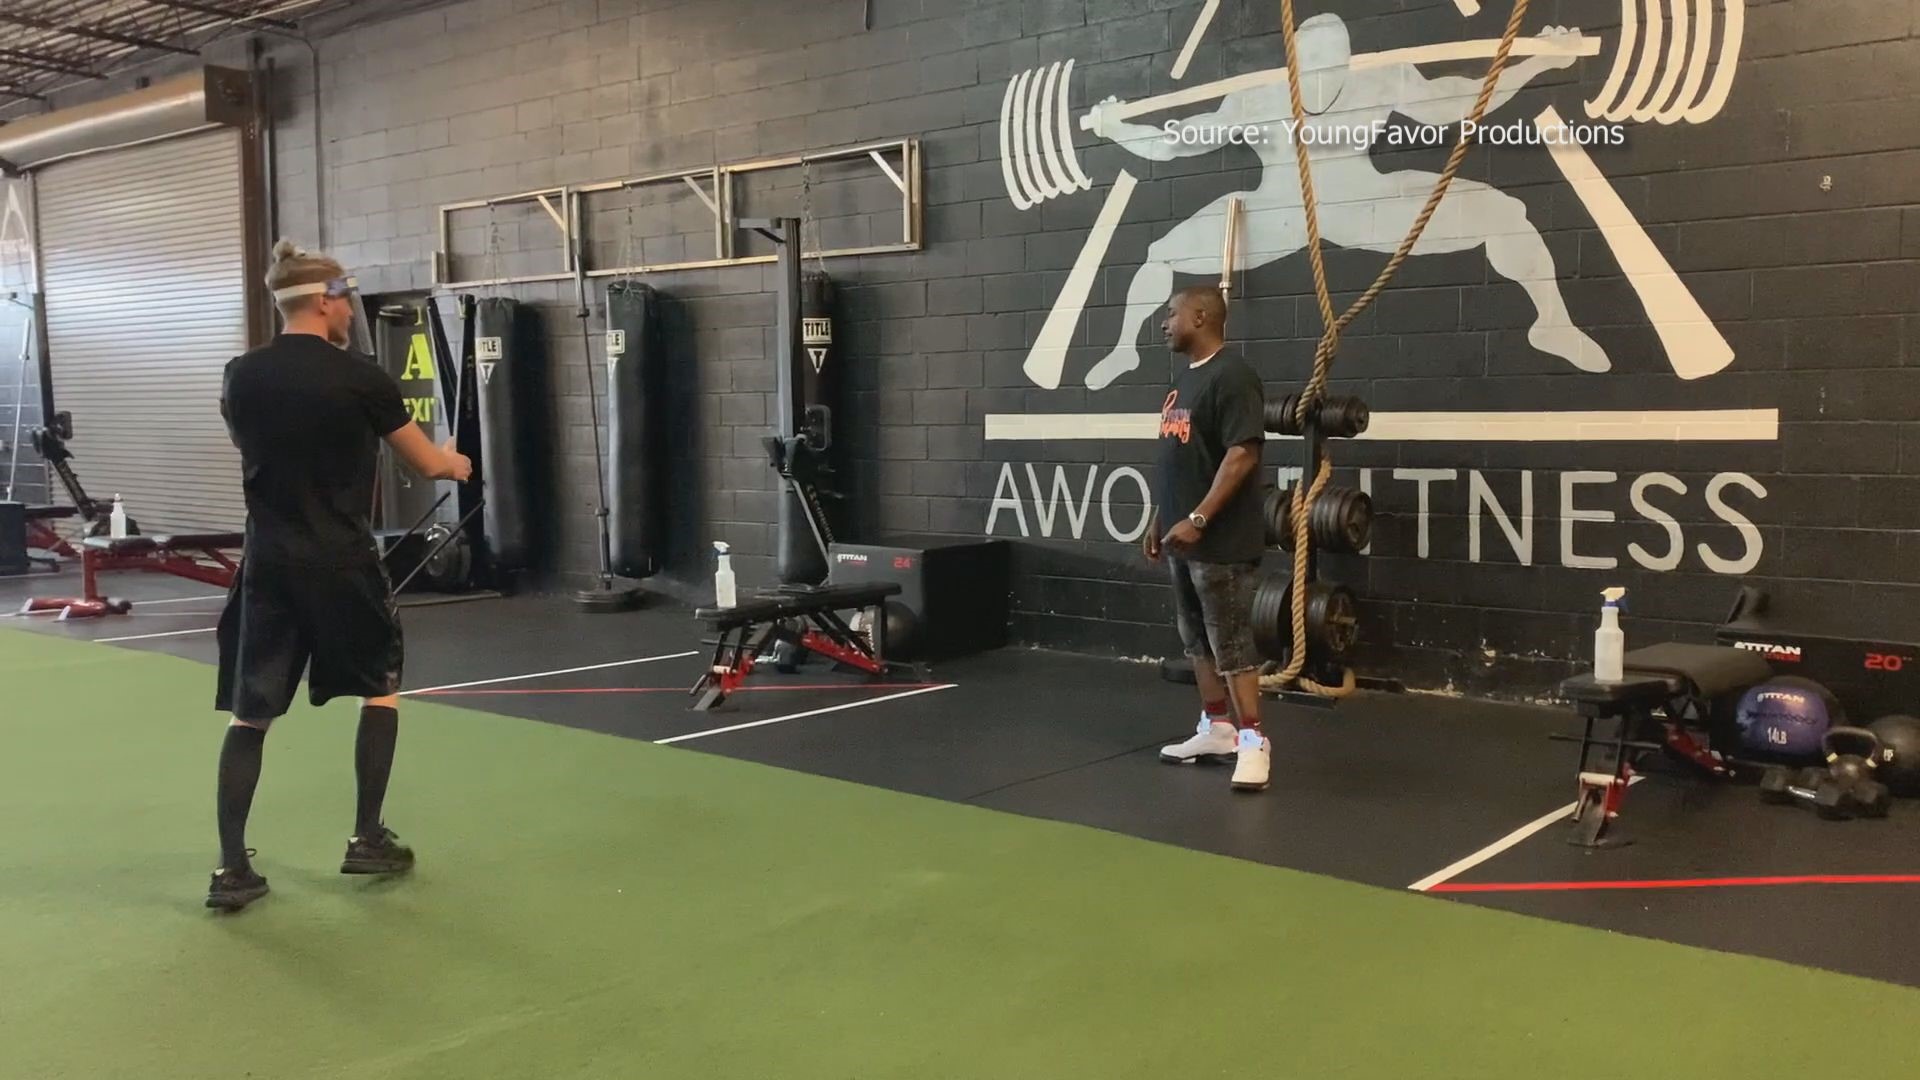 AWOL Fitness in Greensboro is transforming how fitness is done as safety remains top priority during COVID-19.